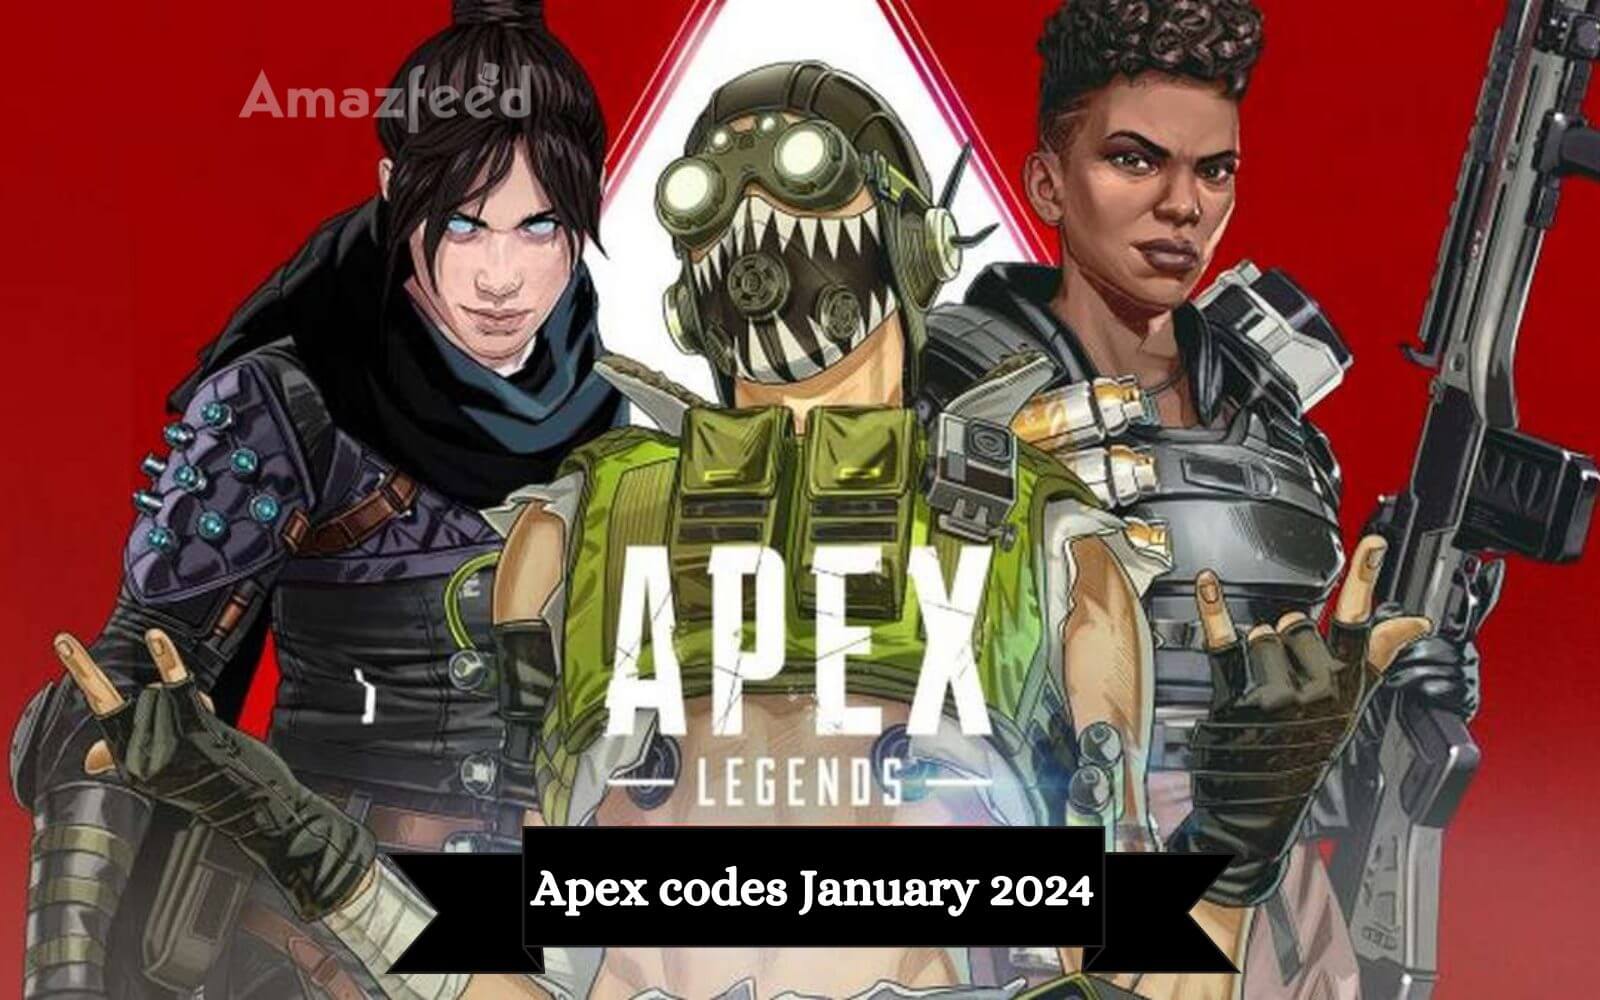 Apex Codes (February 2024) Free Coins, Skins and Boosts » Amazfeed